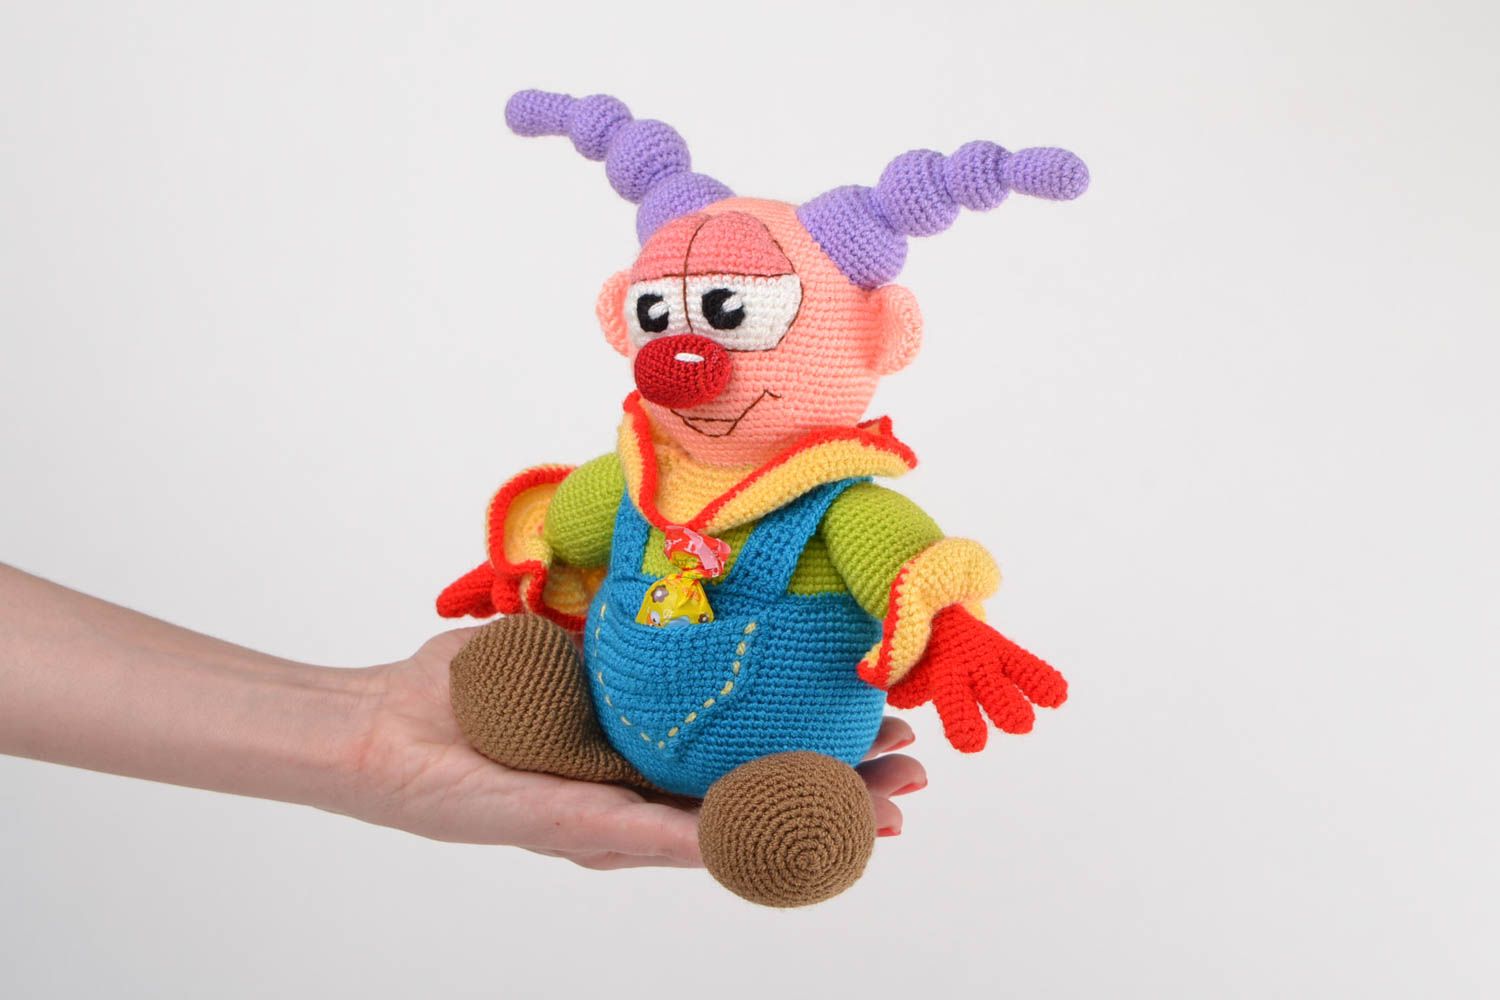 Handmade designer soft toy crocheted of acrylic threads colorful bright clown photo 2